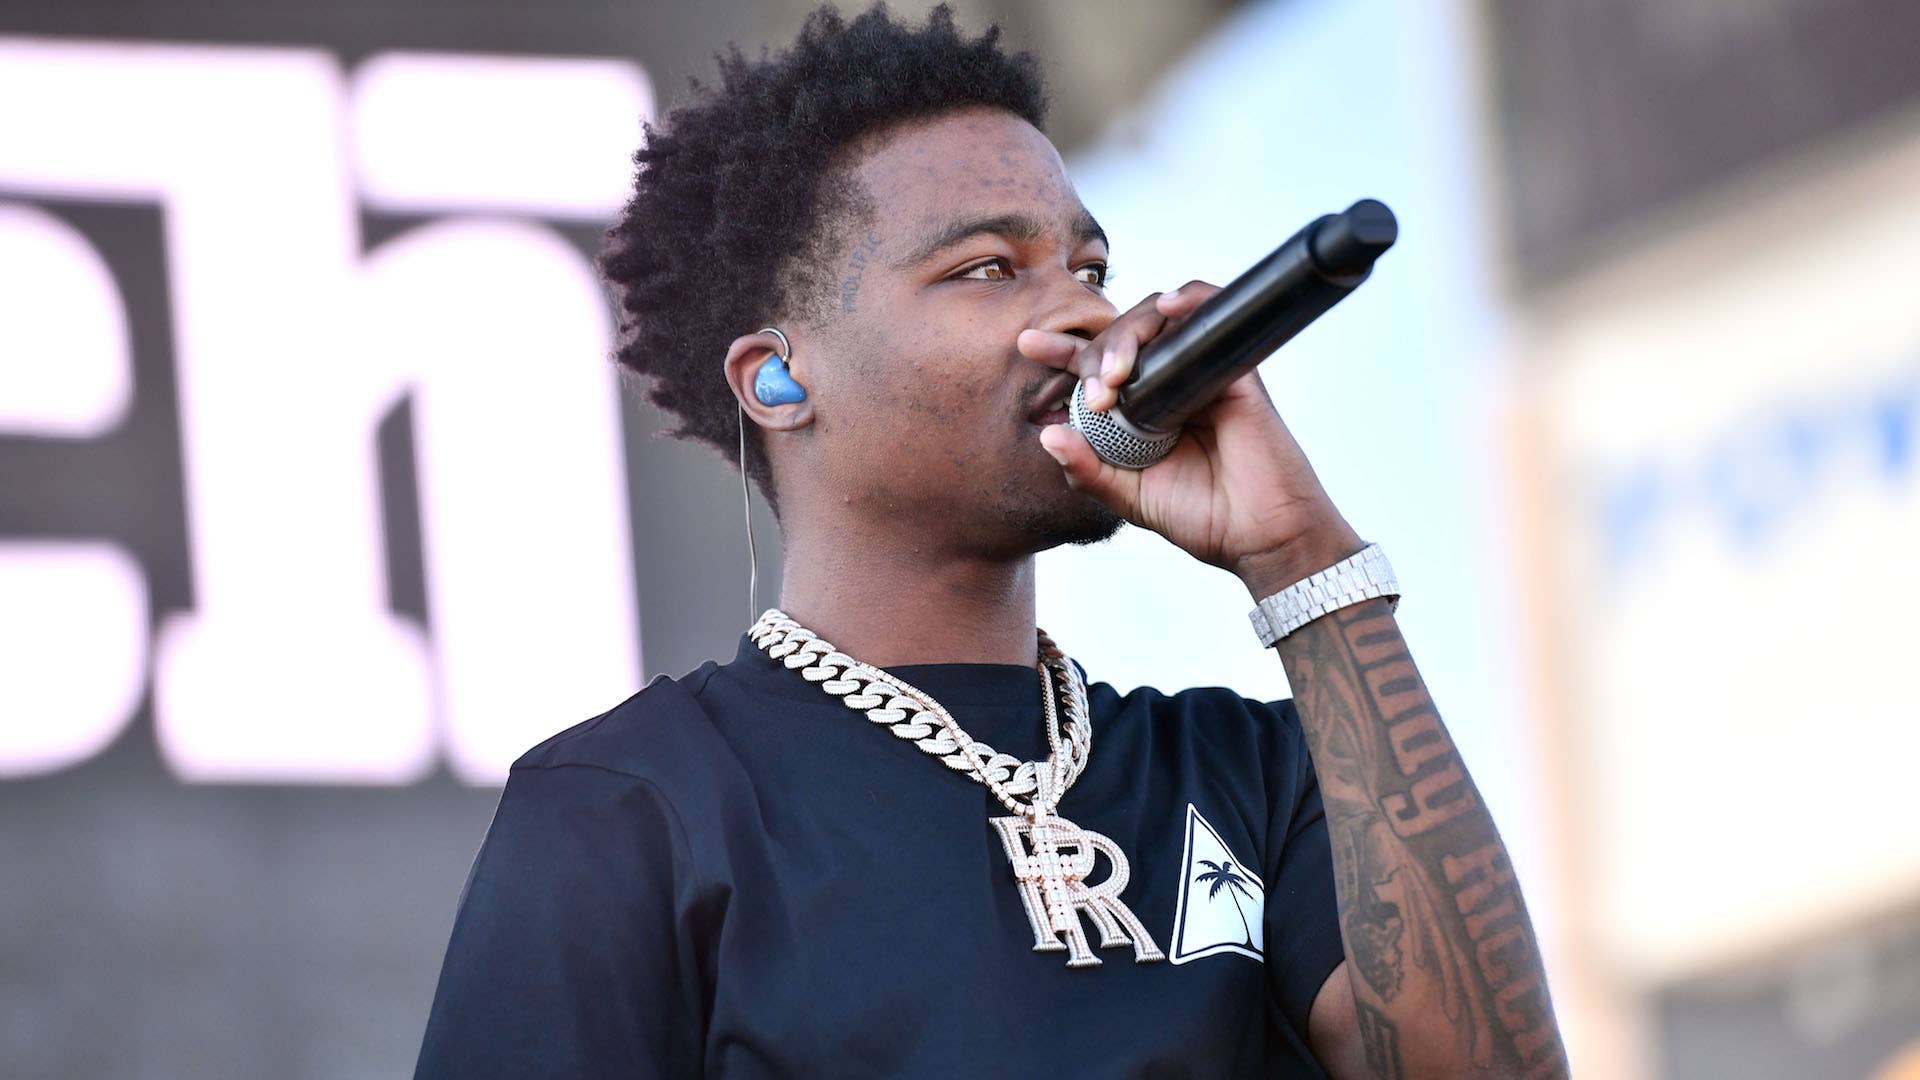 Rapper Roddy Ricch performs onstage during the 92.3 Real Street Festival